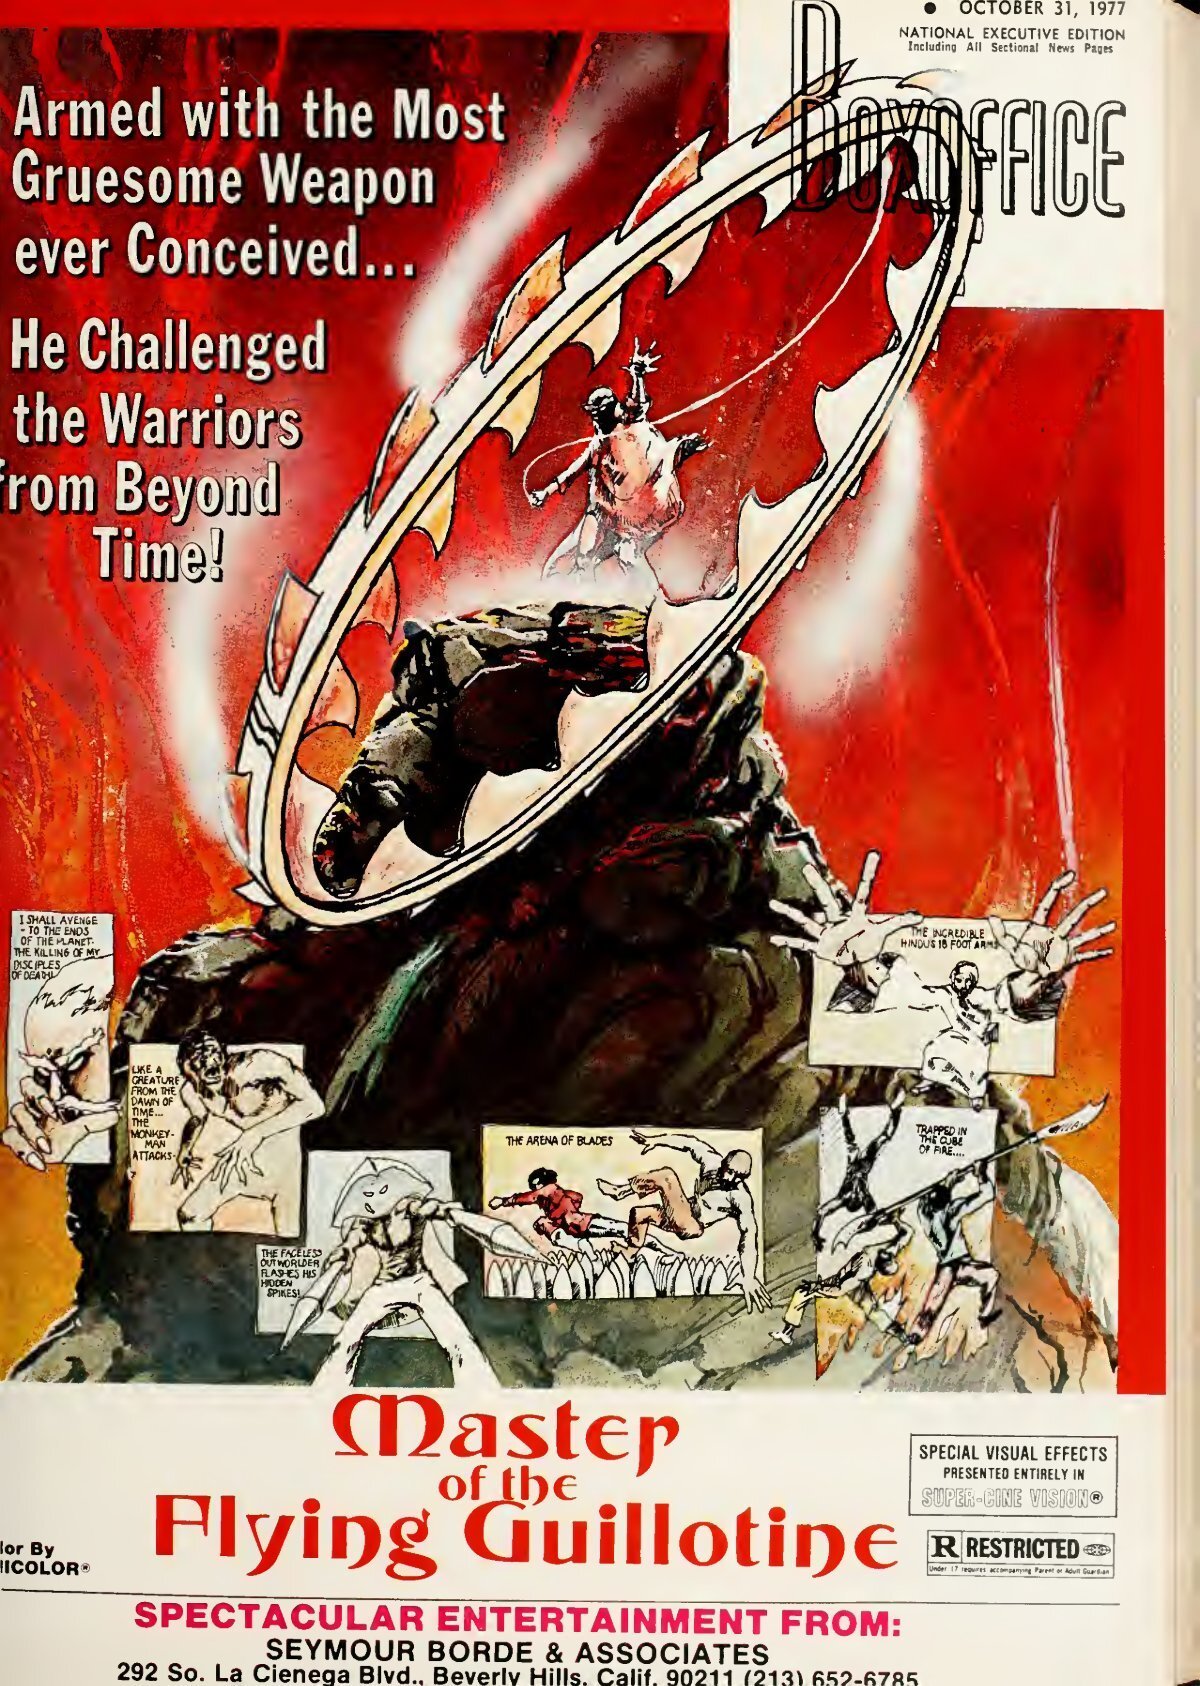 Challenge to Lassie'' movie poster, 1949 Mixed Media by Movie